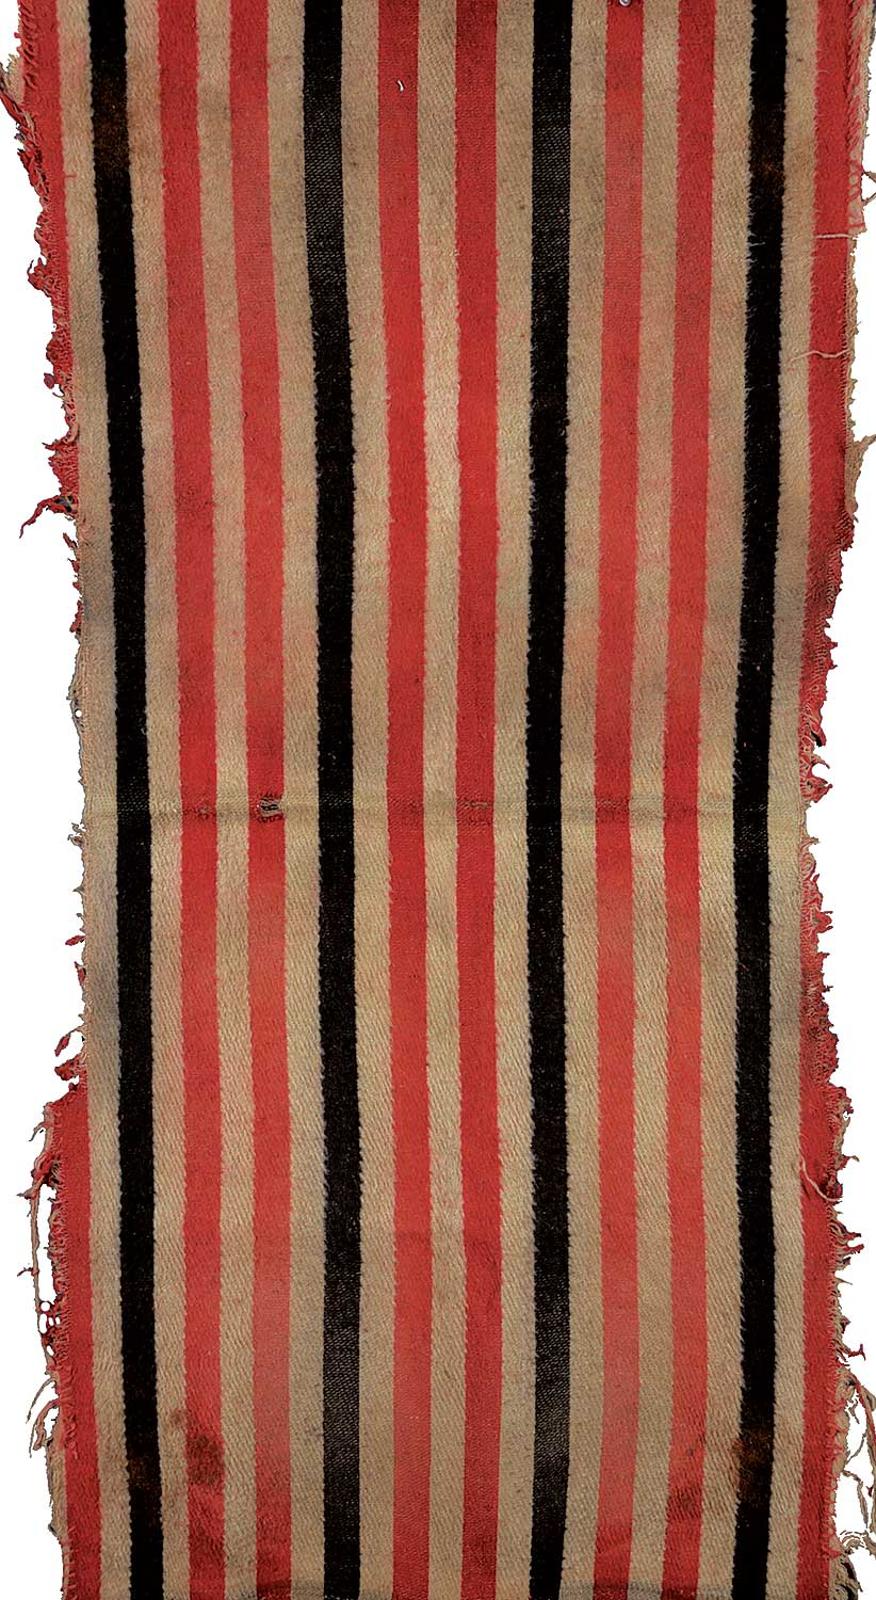 First Nations Basket School - Black and Red Striped Blanket